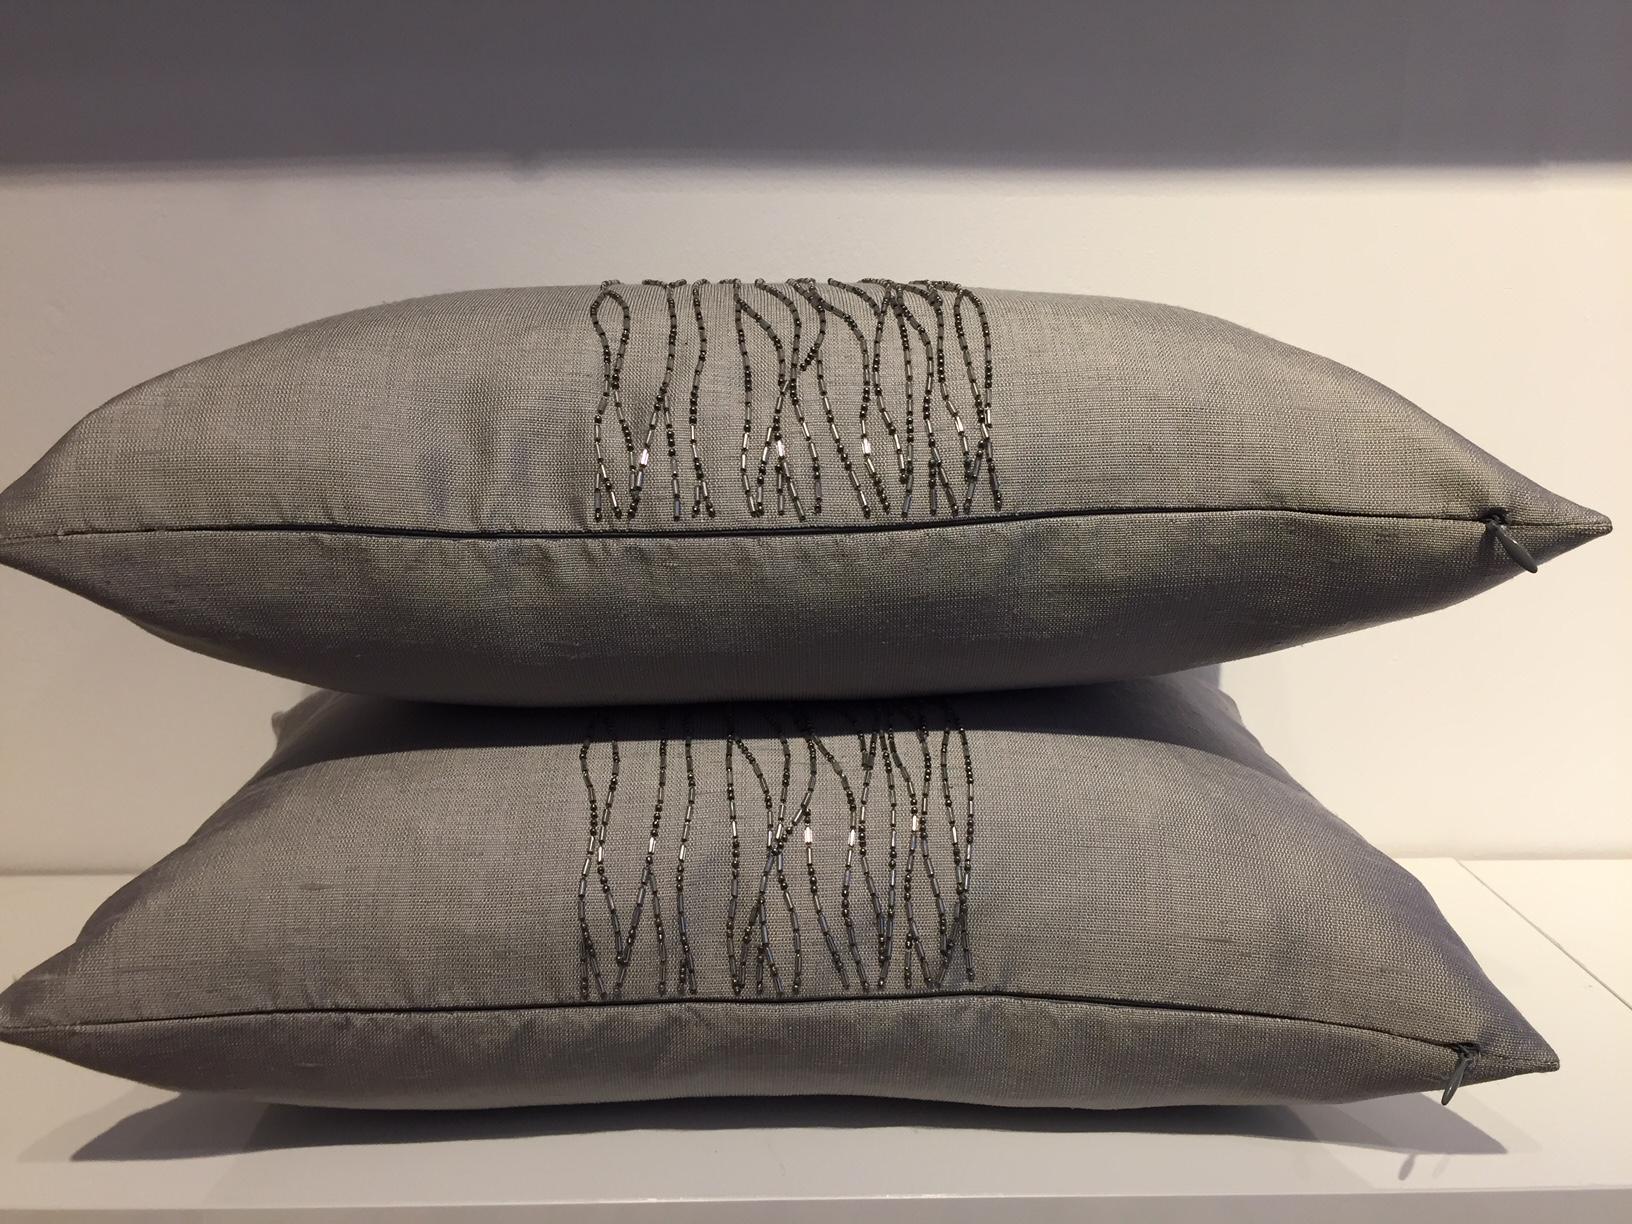 German Contemporary Hand Embroidered Cushions with Silver Beading on Silver-Grey Silk